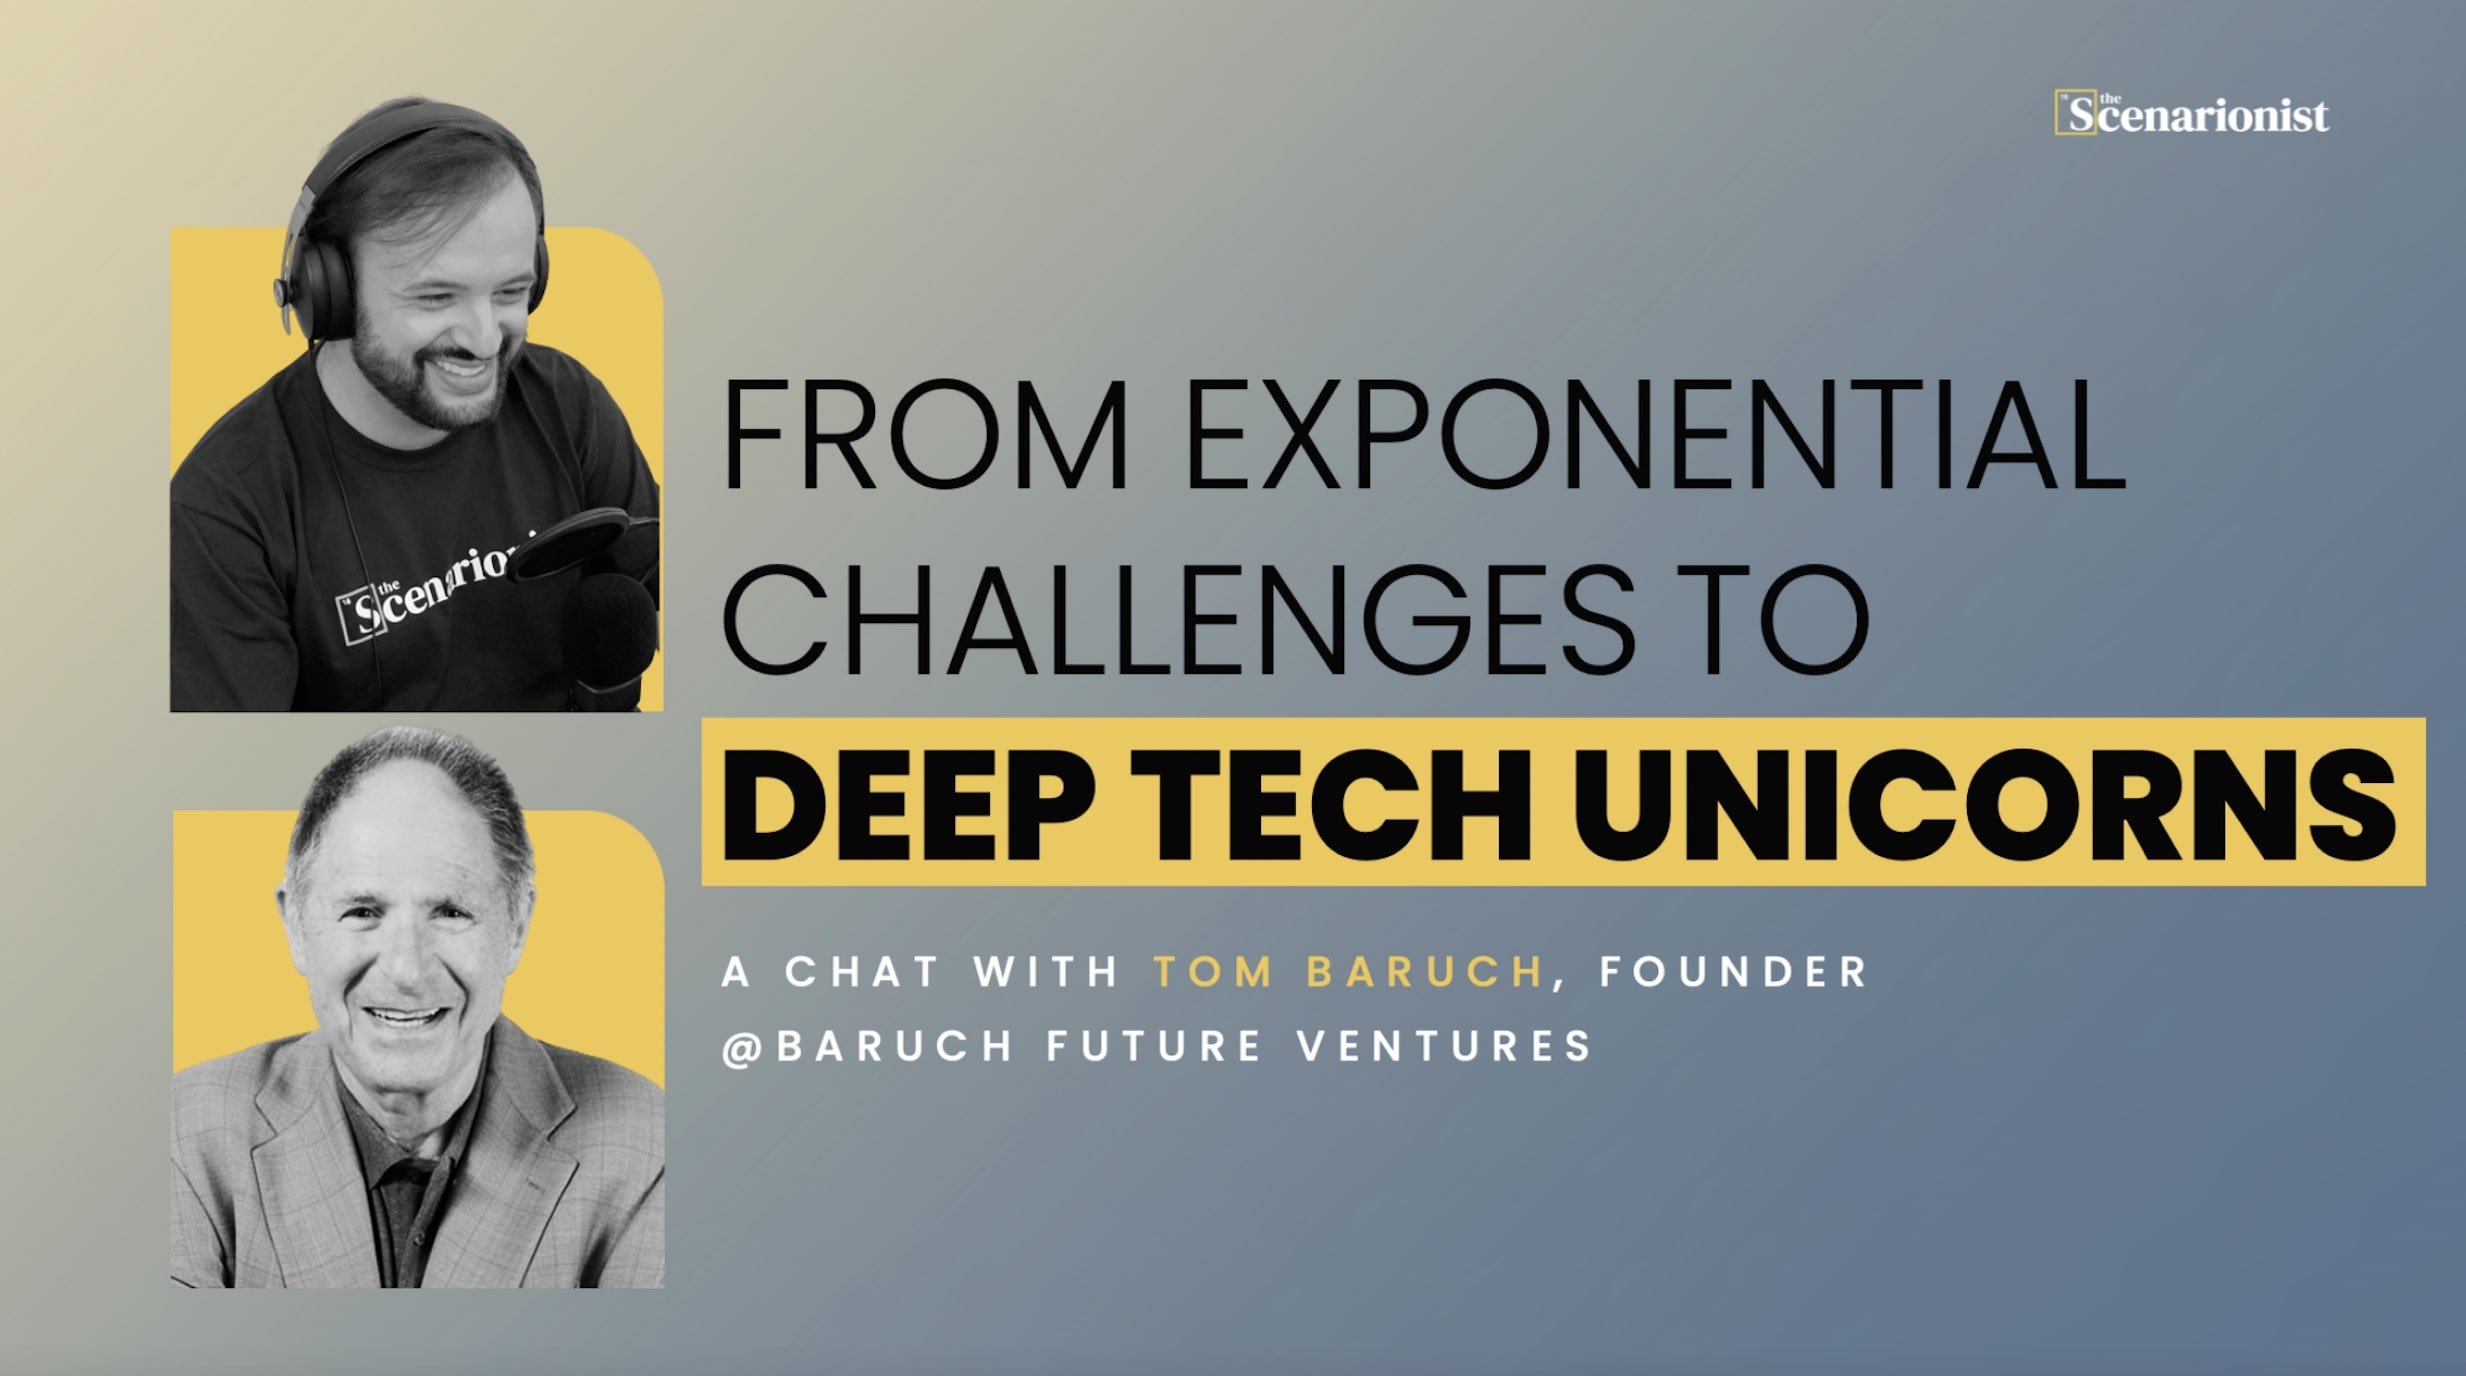 From Exponential Challenges to Deep Tech Unicorns